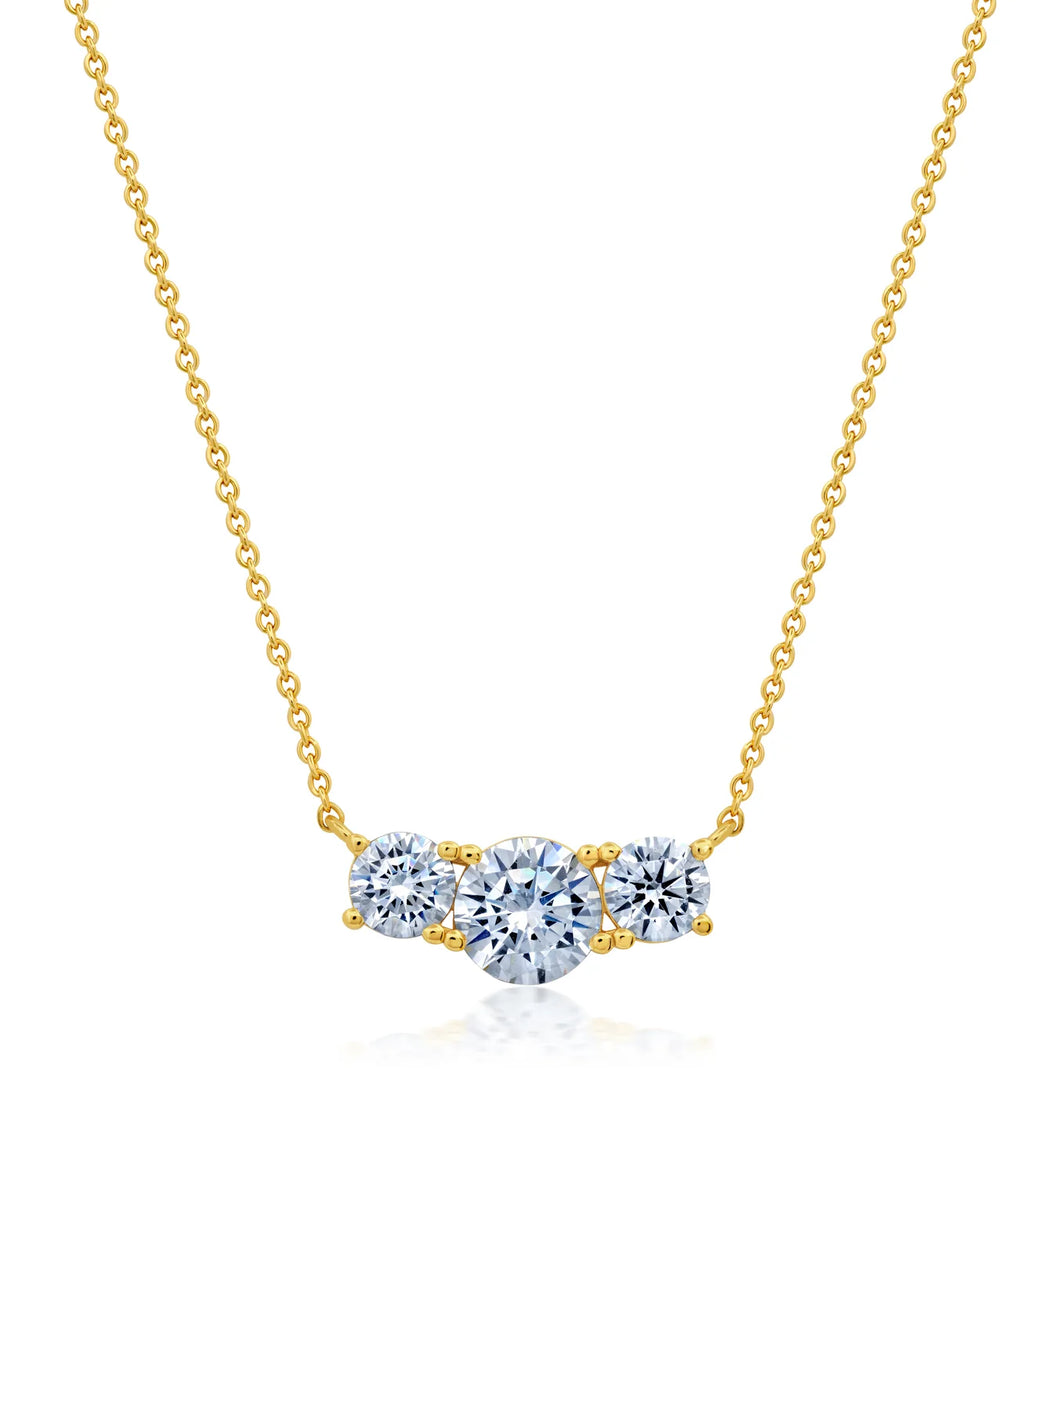 Brilliant Round 3 Stone Prong Set 16'' Extending Necklace Finished in 18Kt Yellow Gold